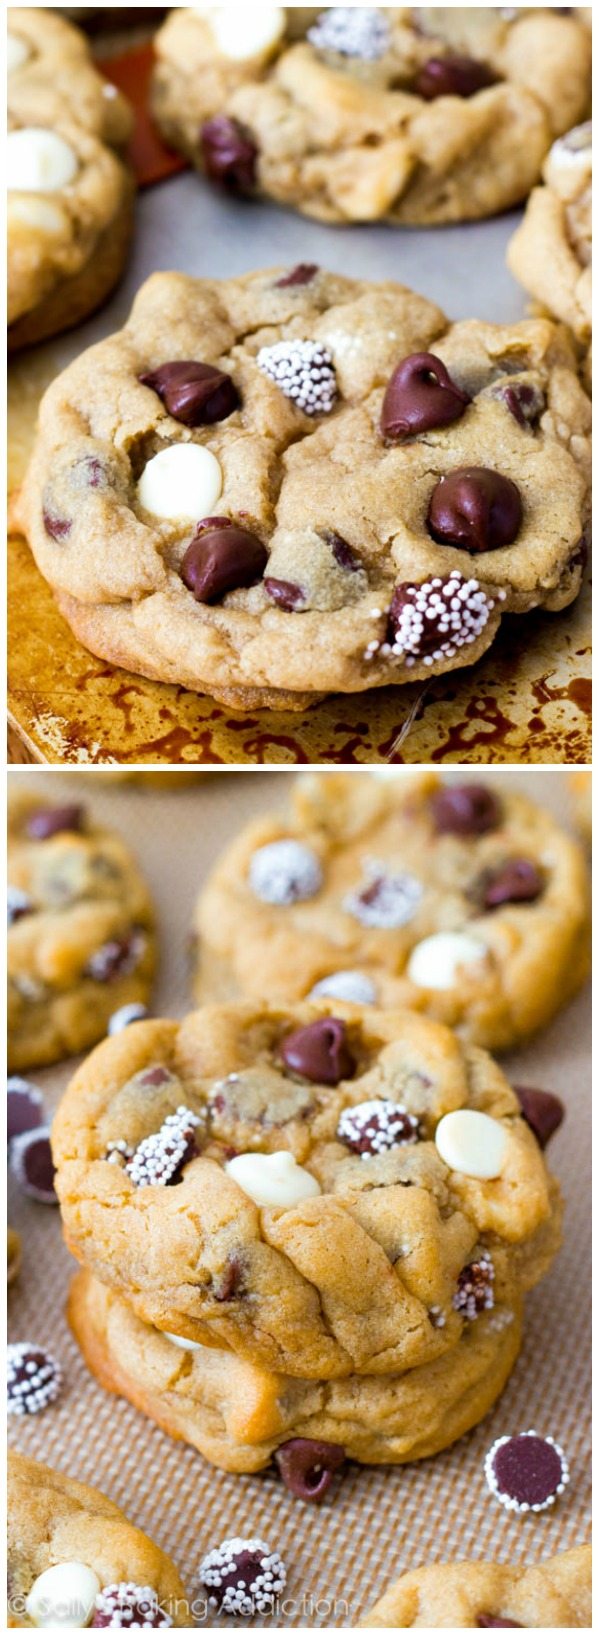 2 images of triple chocolate chip cookies